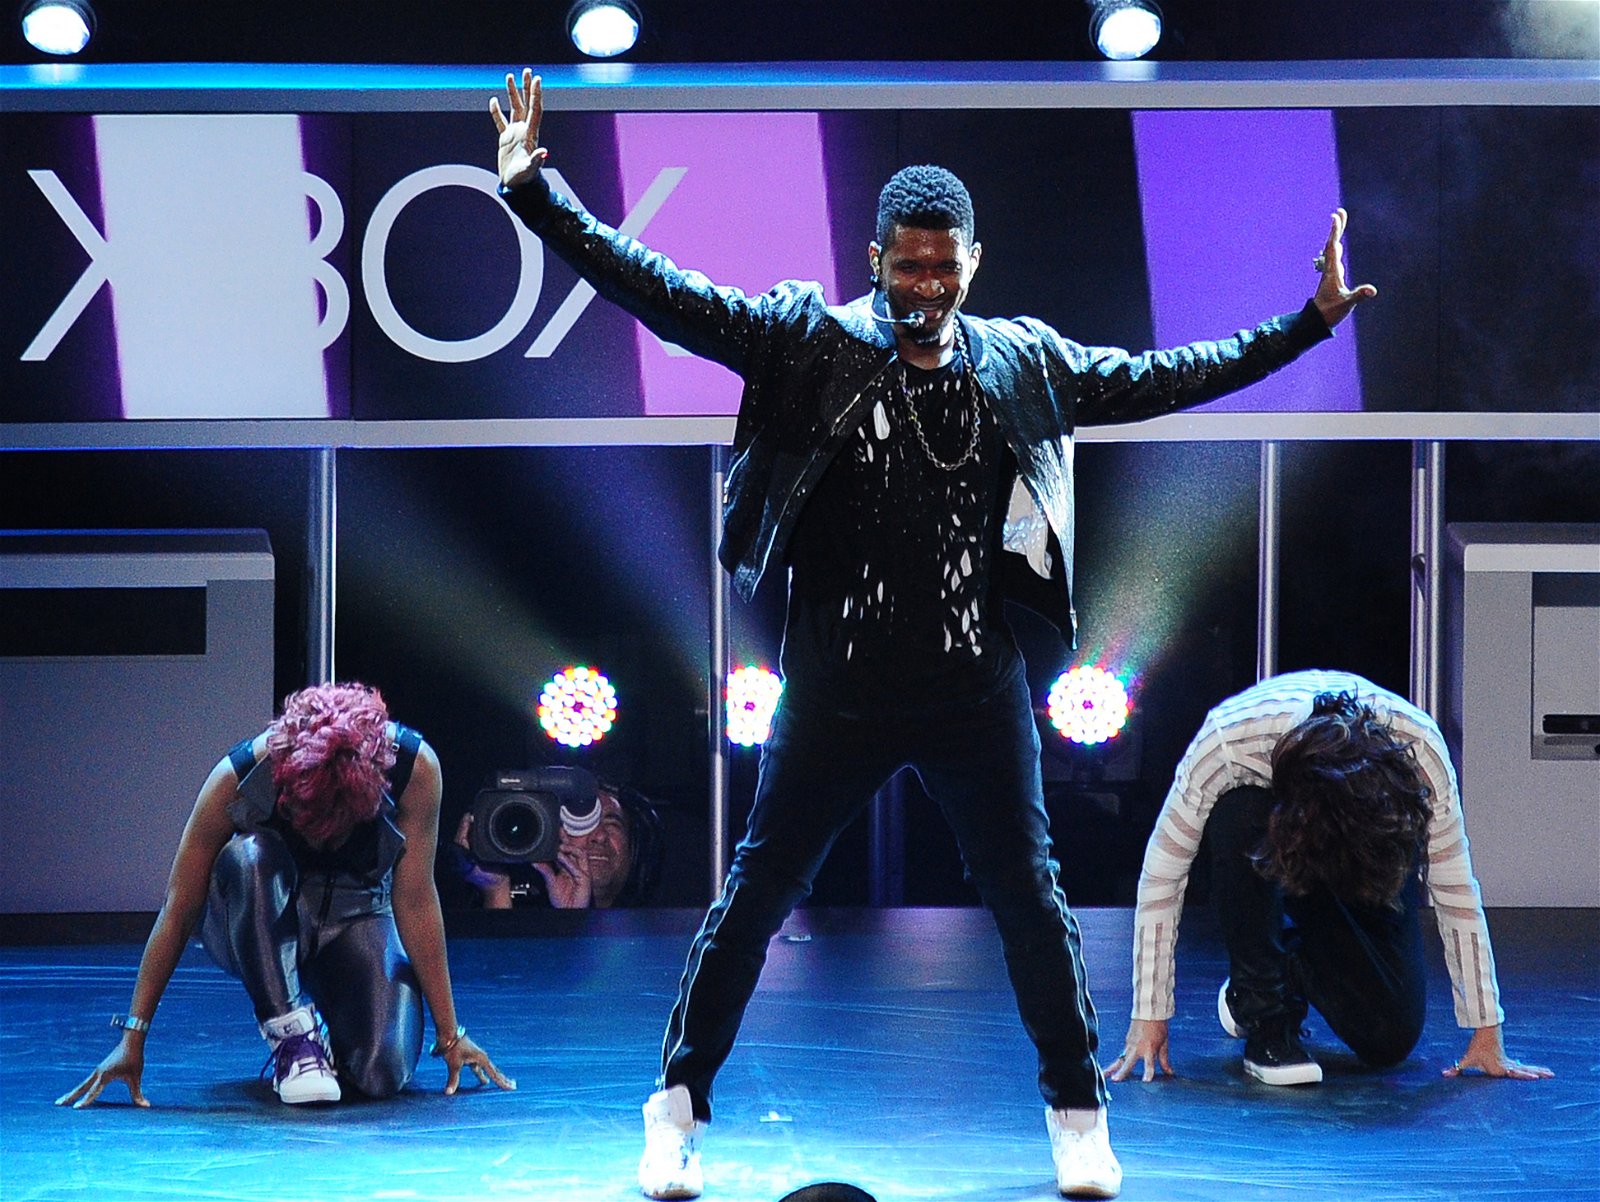 Us Singer Usher Performs As He Introduces The  Music Video Game  &Quot;Dance Central Three&Quot;  For The Xbox 360 With Kinect At The Microsoft Xbox E3 2012 Media Briefing In Los Angeles On June 4, 2012. The Electronic Entertainment Expo (E3), The Video Game Industry'S Biggest Event, Runs From June 5-7.     Afp Photo/Robyn Beck        (Photo Credit Should Read Robyn Beck/Afp/Gettyimages)